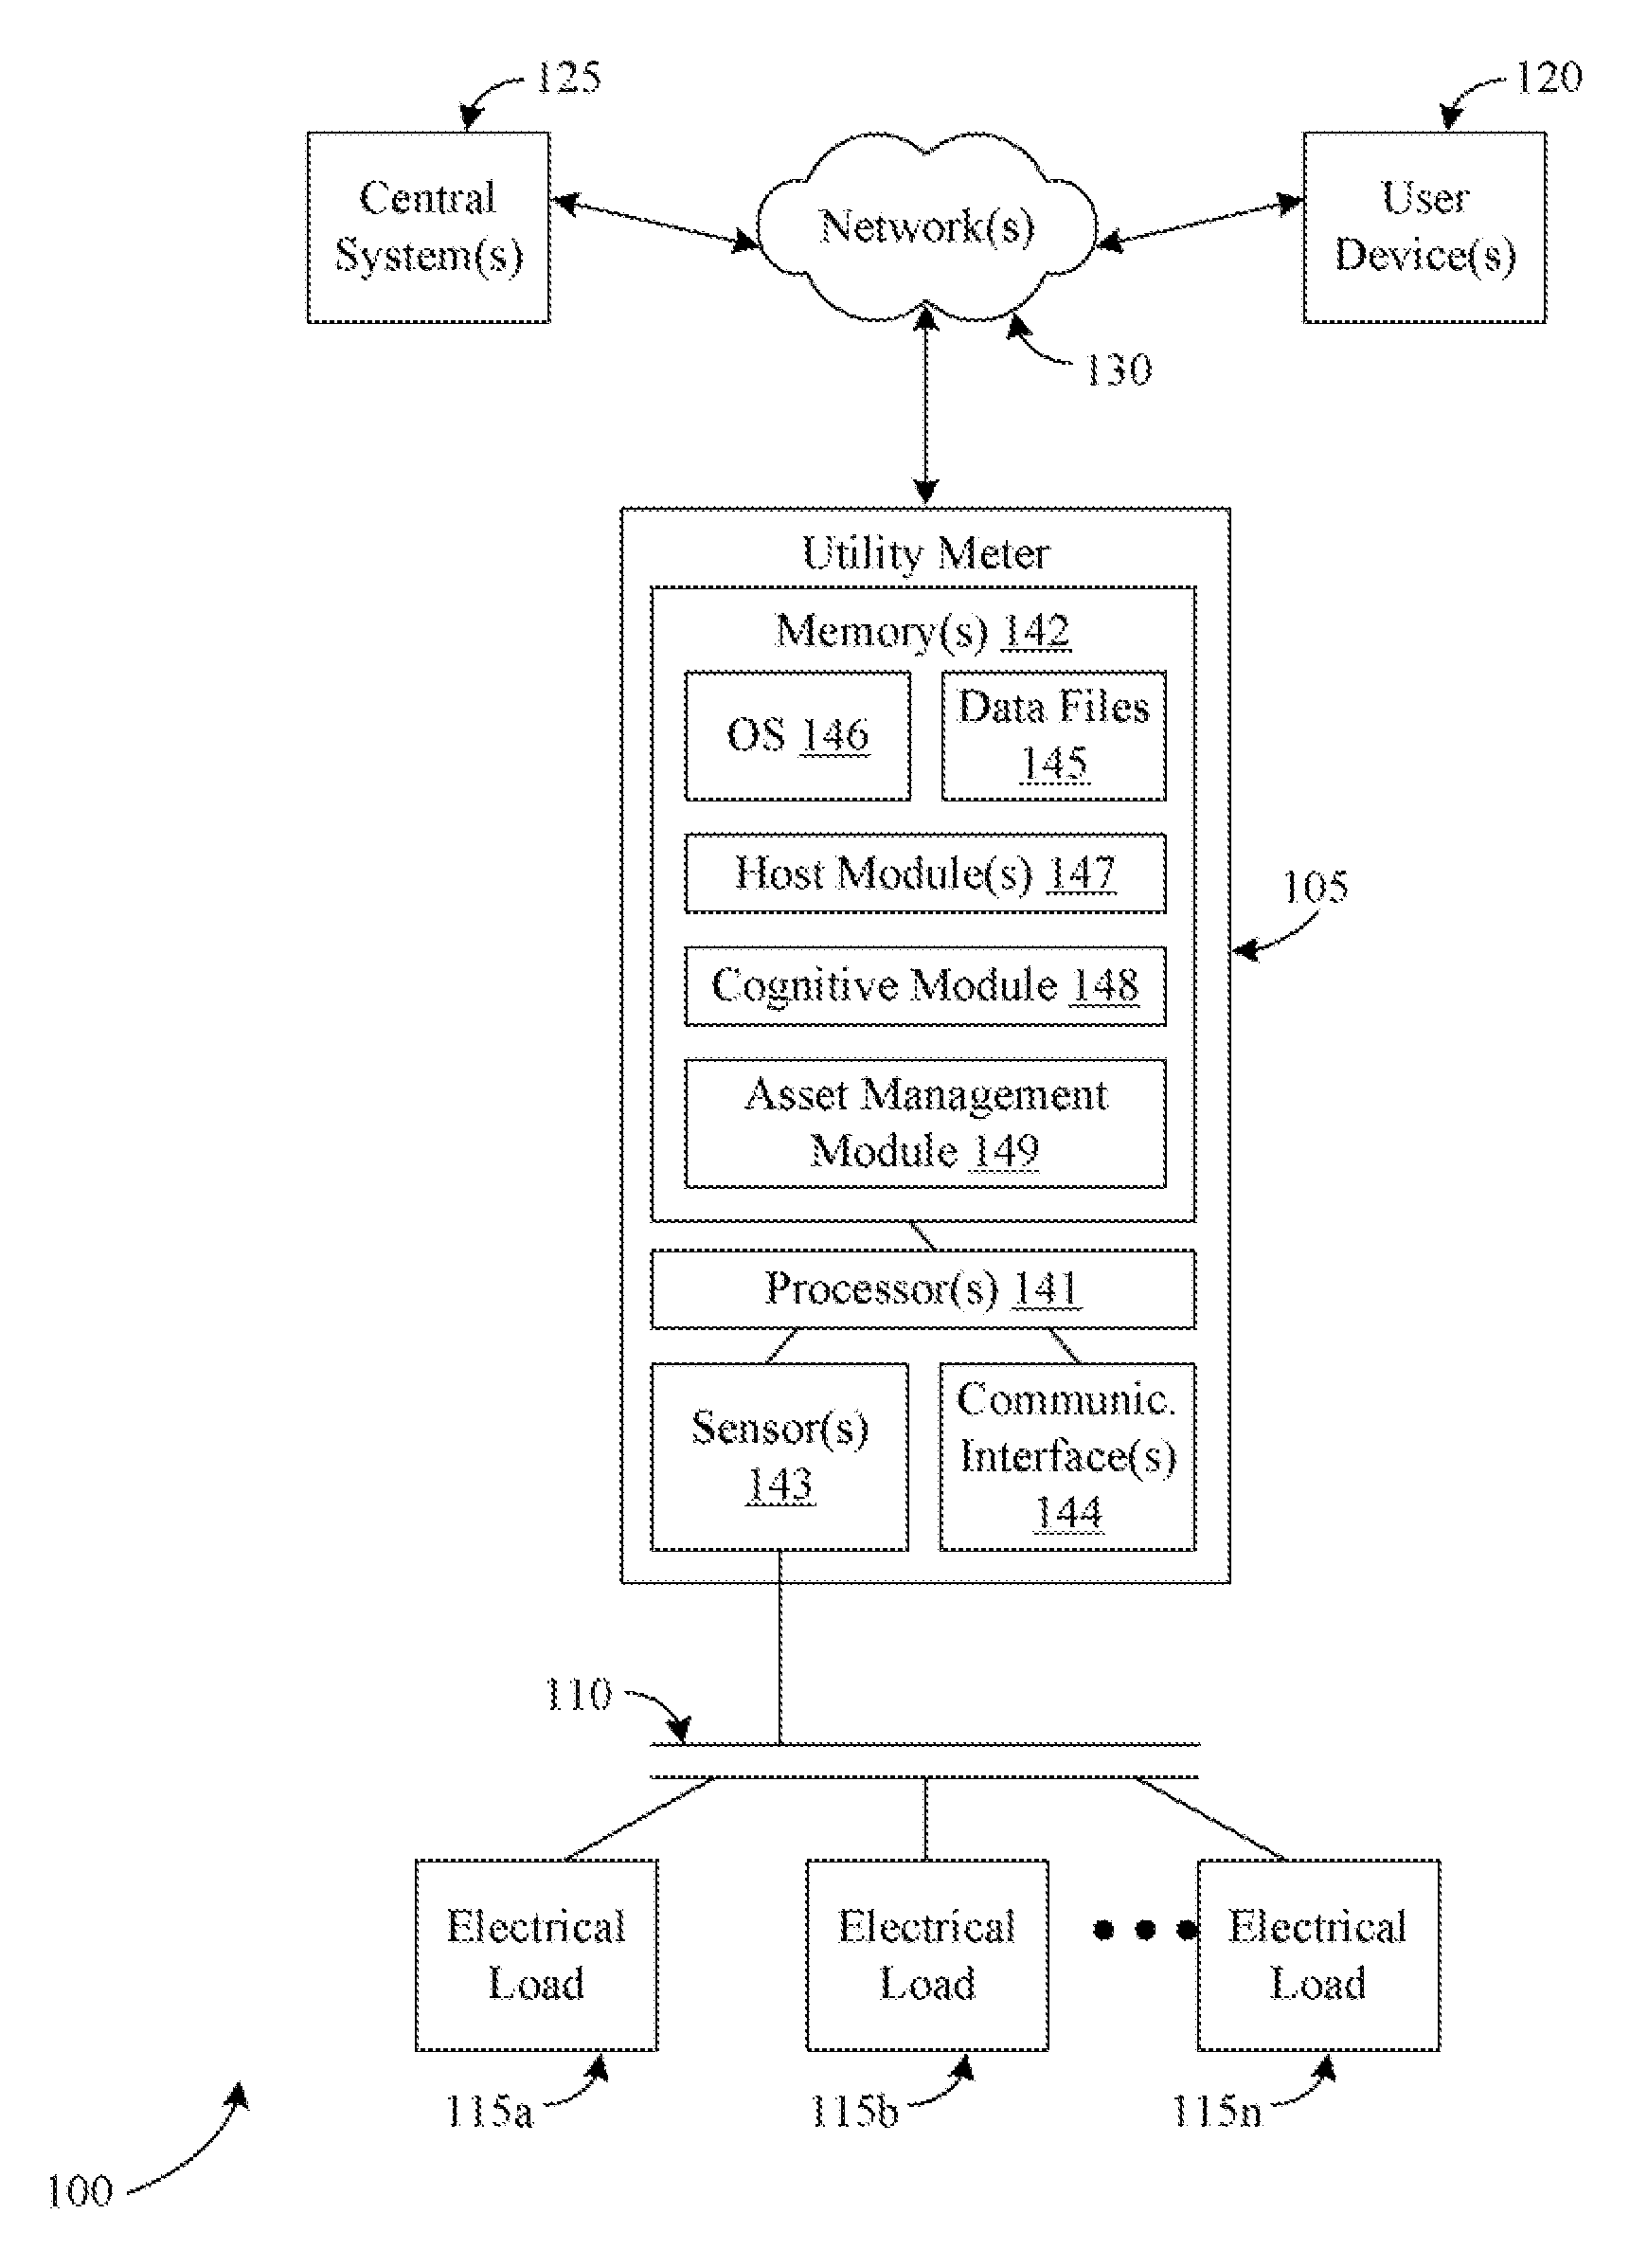 Systems, methods, and apparatus for evaluating load power consumption utilizing a power meter